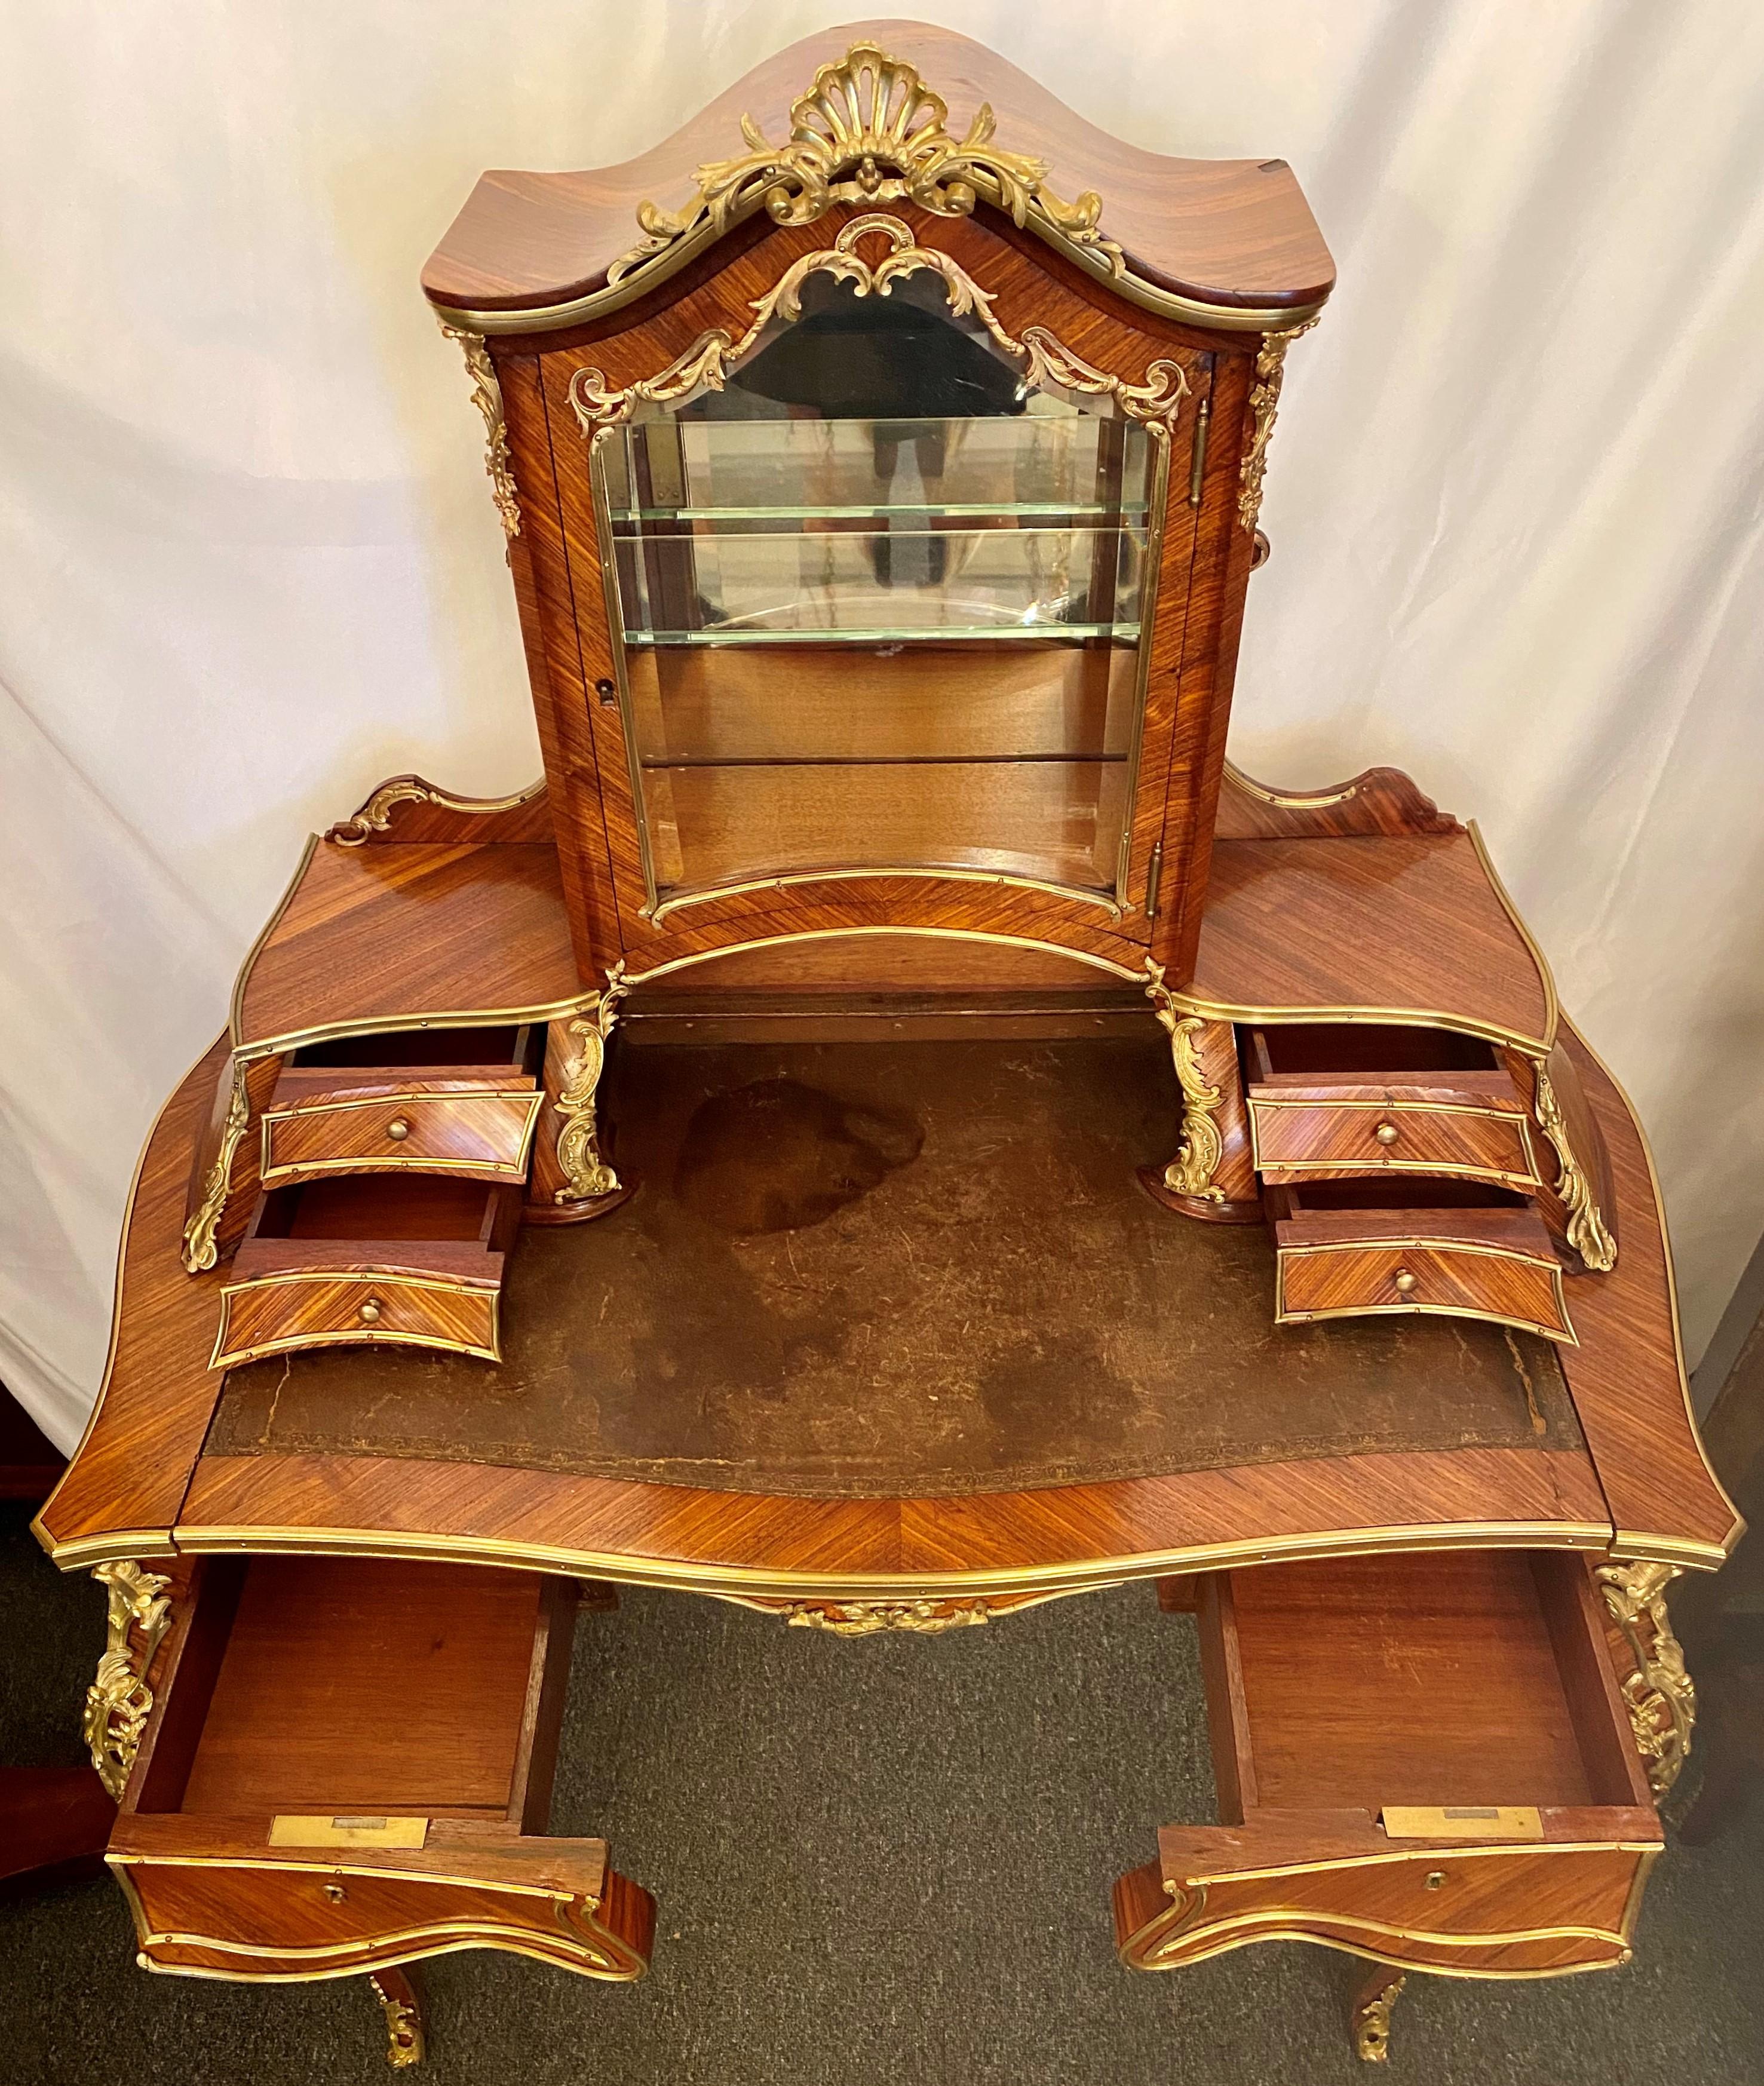 Antique French Rosewood and Gold Bronze Writing Desk or Vanity, circa 1880-1890 For Sale 2